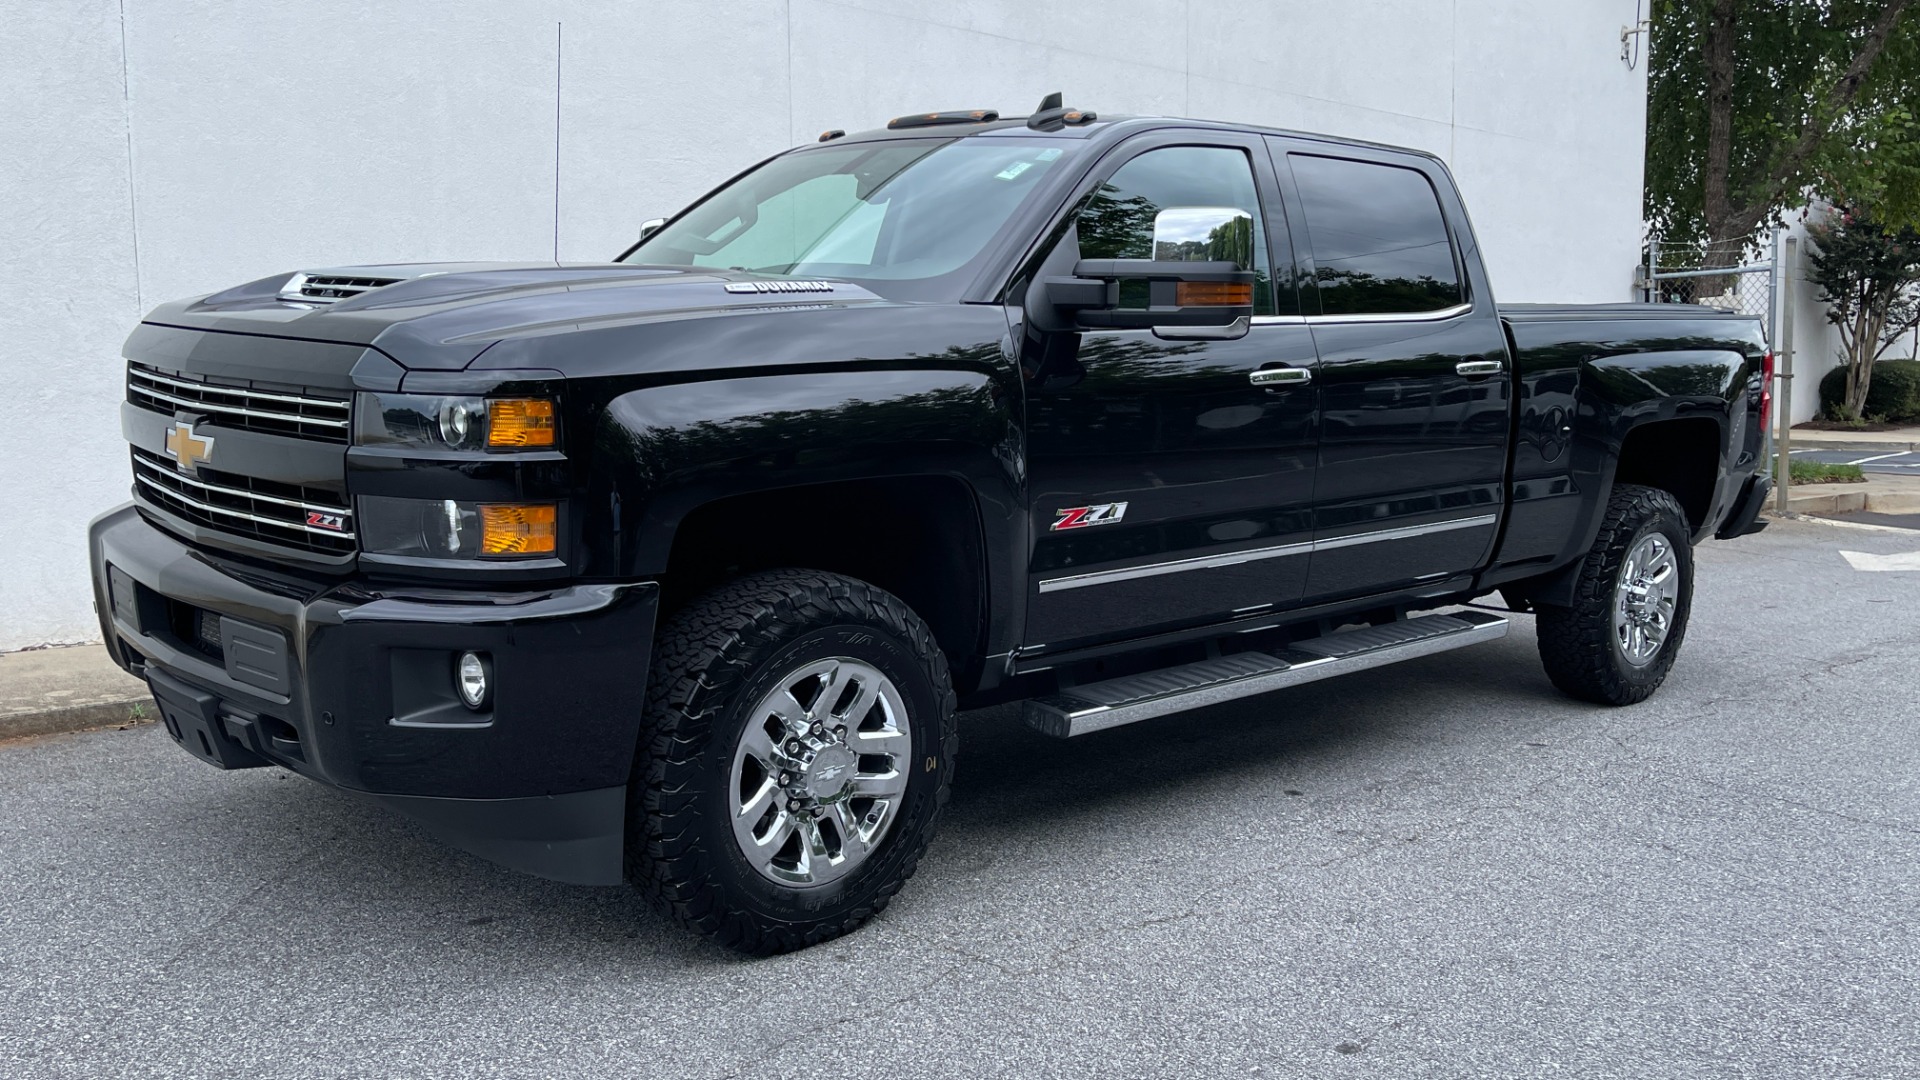 Used 2018 Chevrolet Silverado 3500HD LTZ / DURAMAX PLUS PACKAGE / SPORT EDITION / Z71 OFFROAD / SUNROOF / LEATHE for sale $62,795 at Formula Imports in Charlotte NC 28227 3